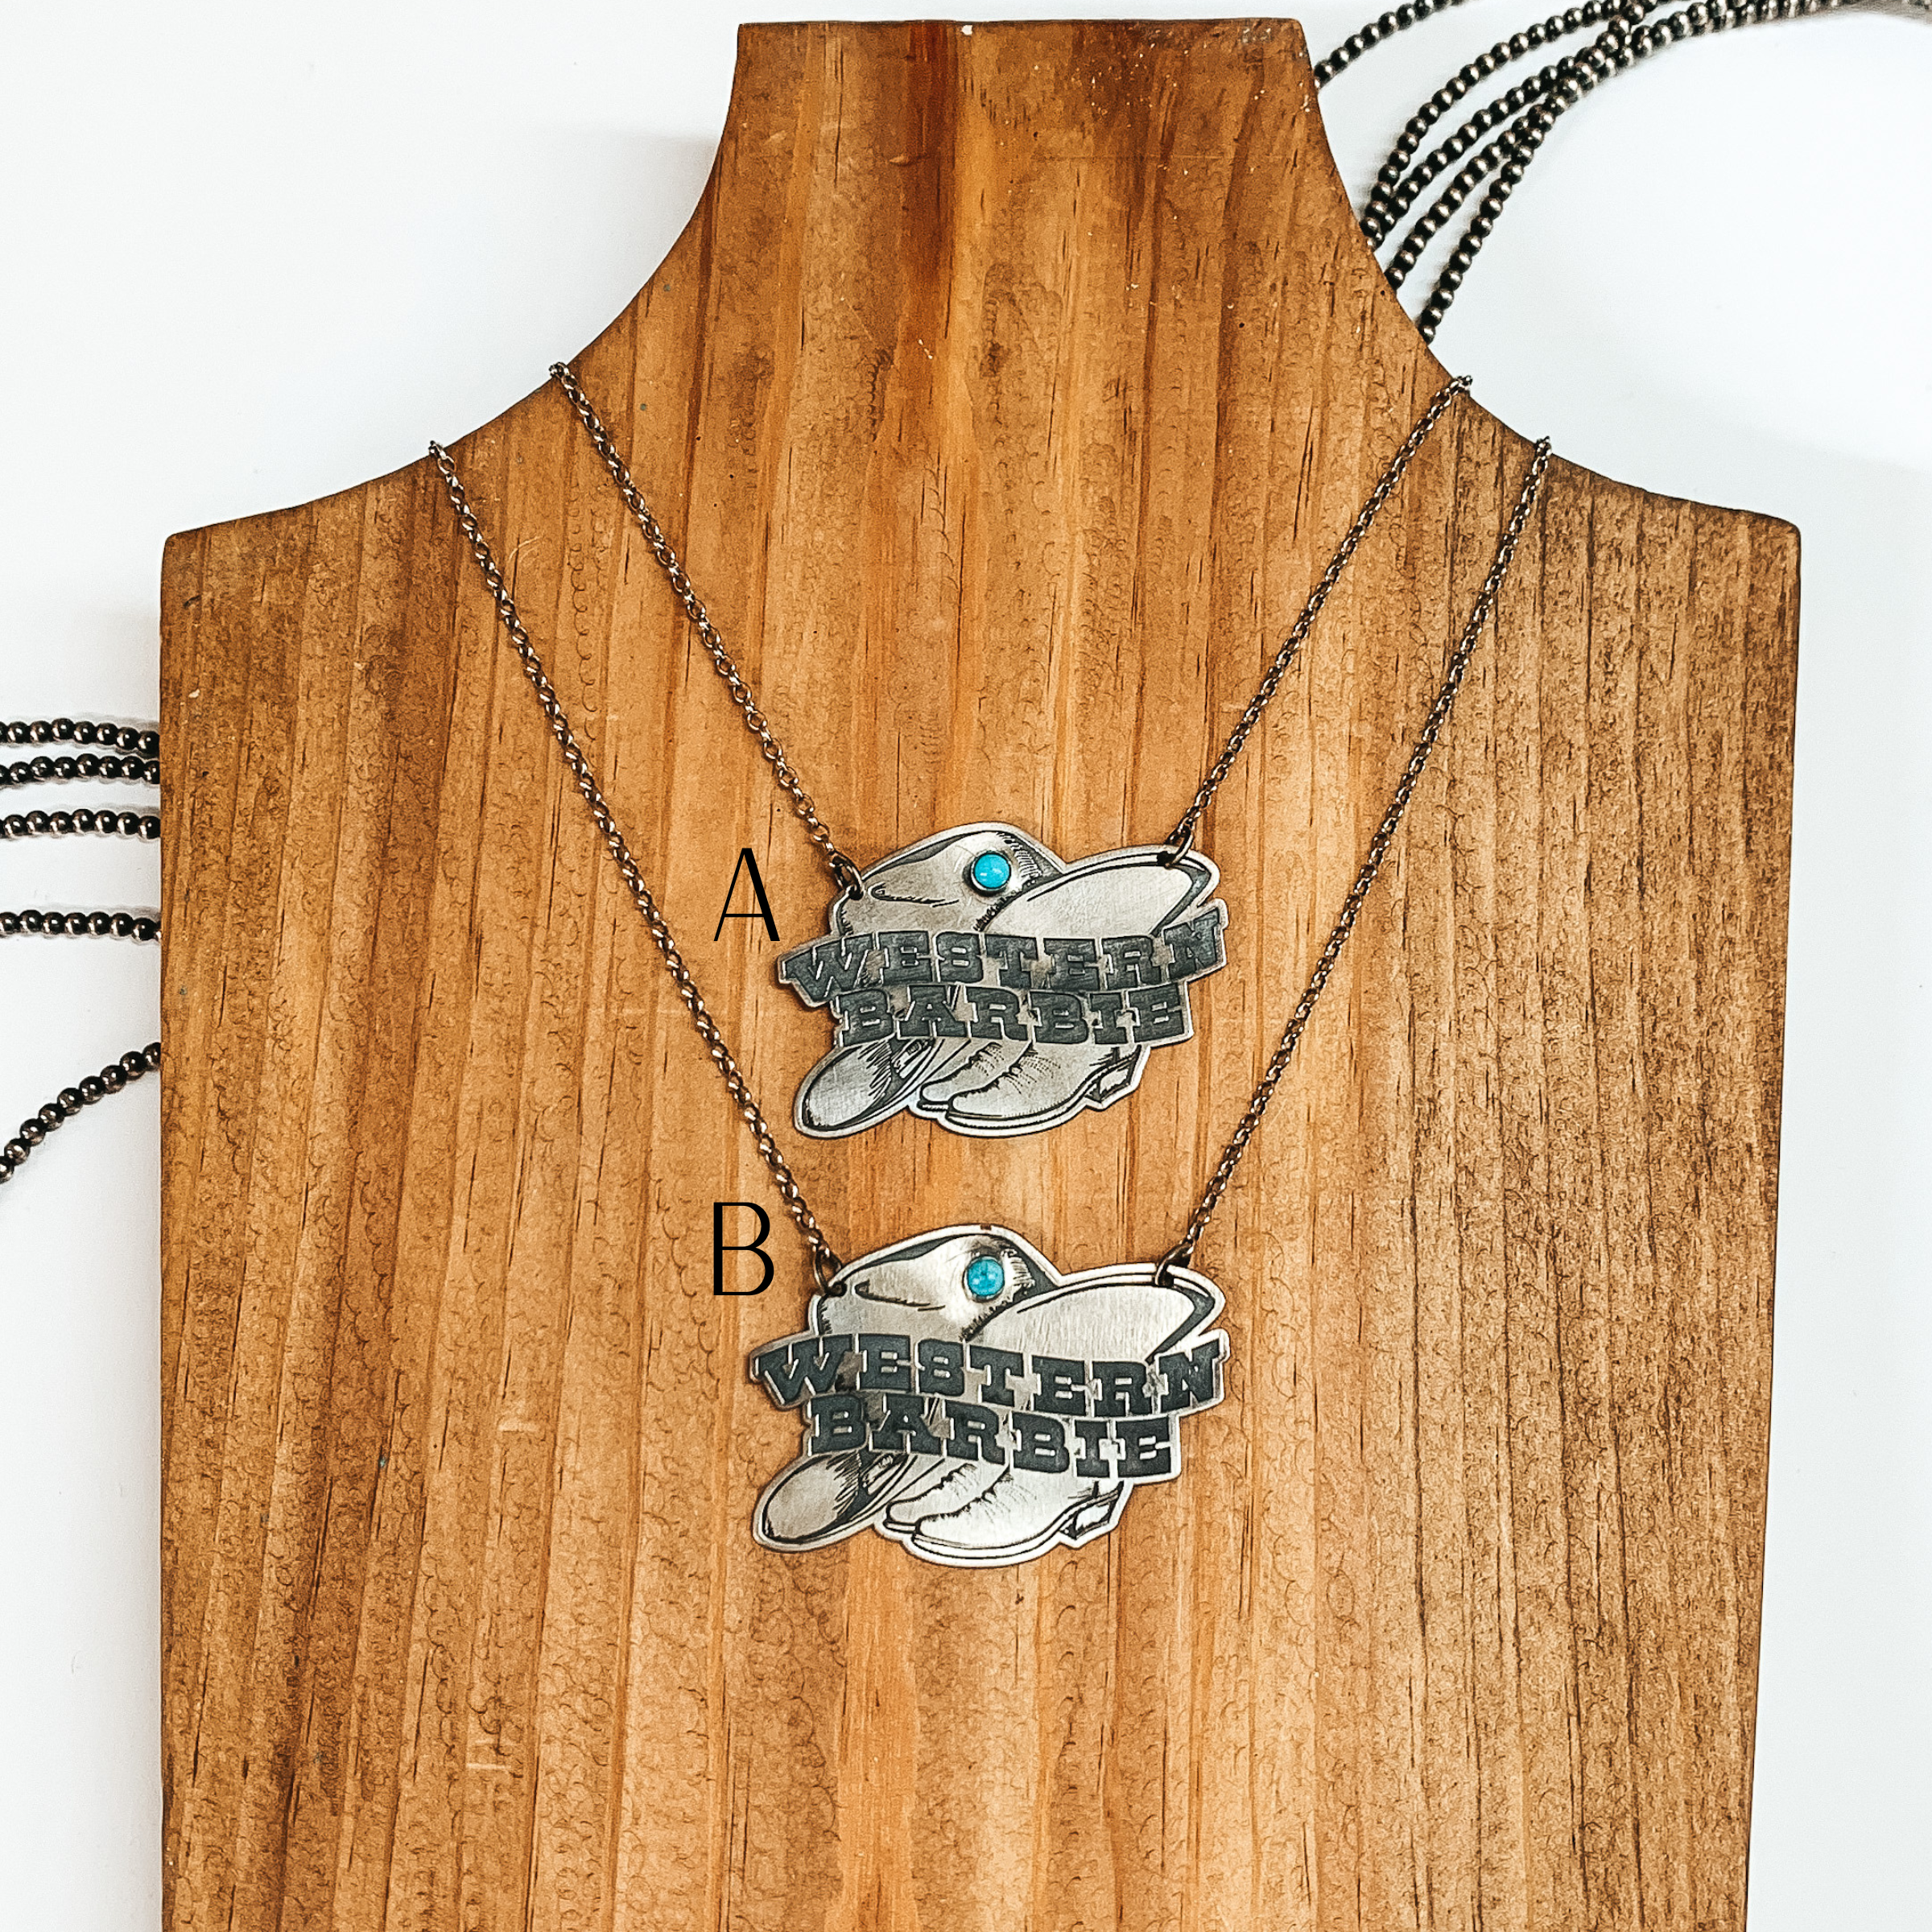 Handmade Sterling Silver Necklace and WESTERN BARBIE Pendant with Kingman Turquoise Stone - Giddy Up Glamour Boutique